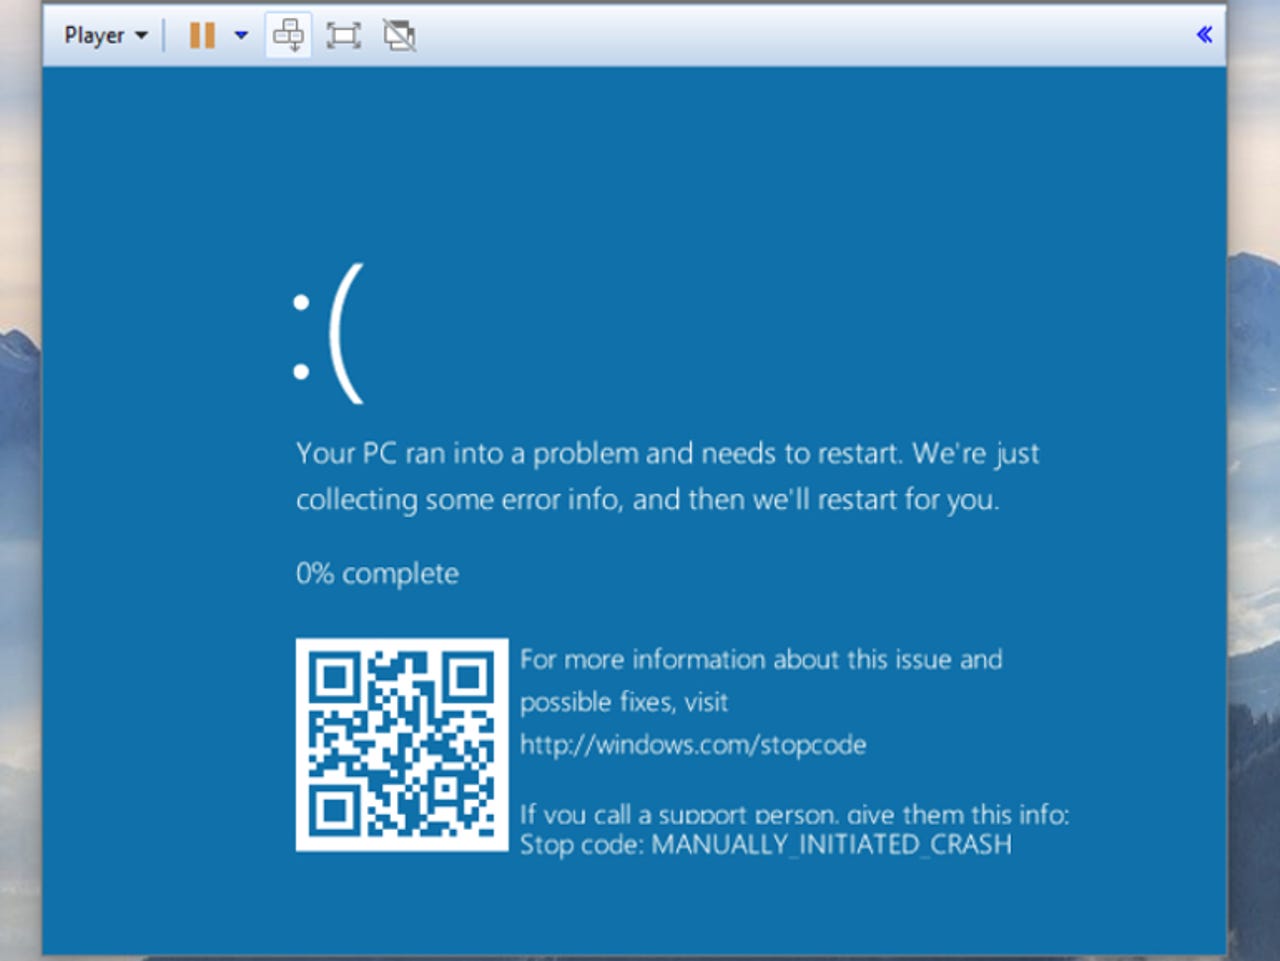 Windows 10 blue screen of death? Now Microsoft adds QR codes to